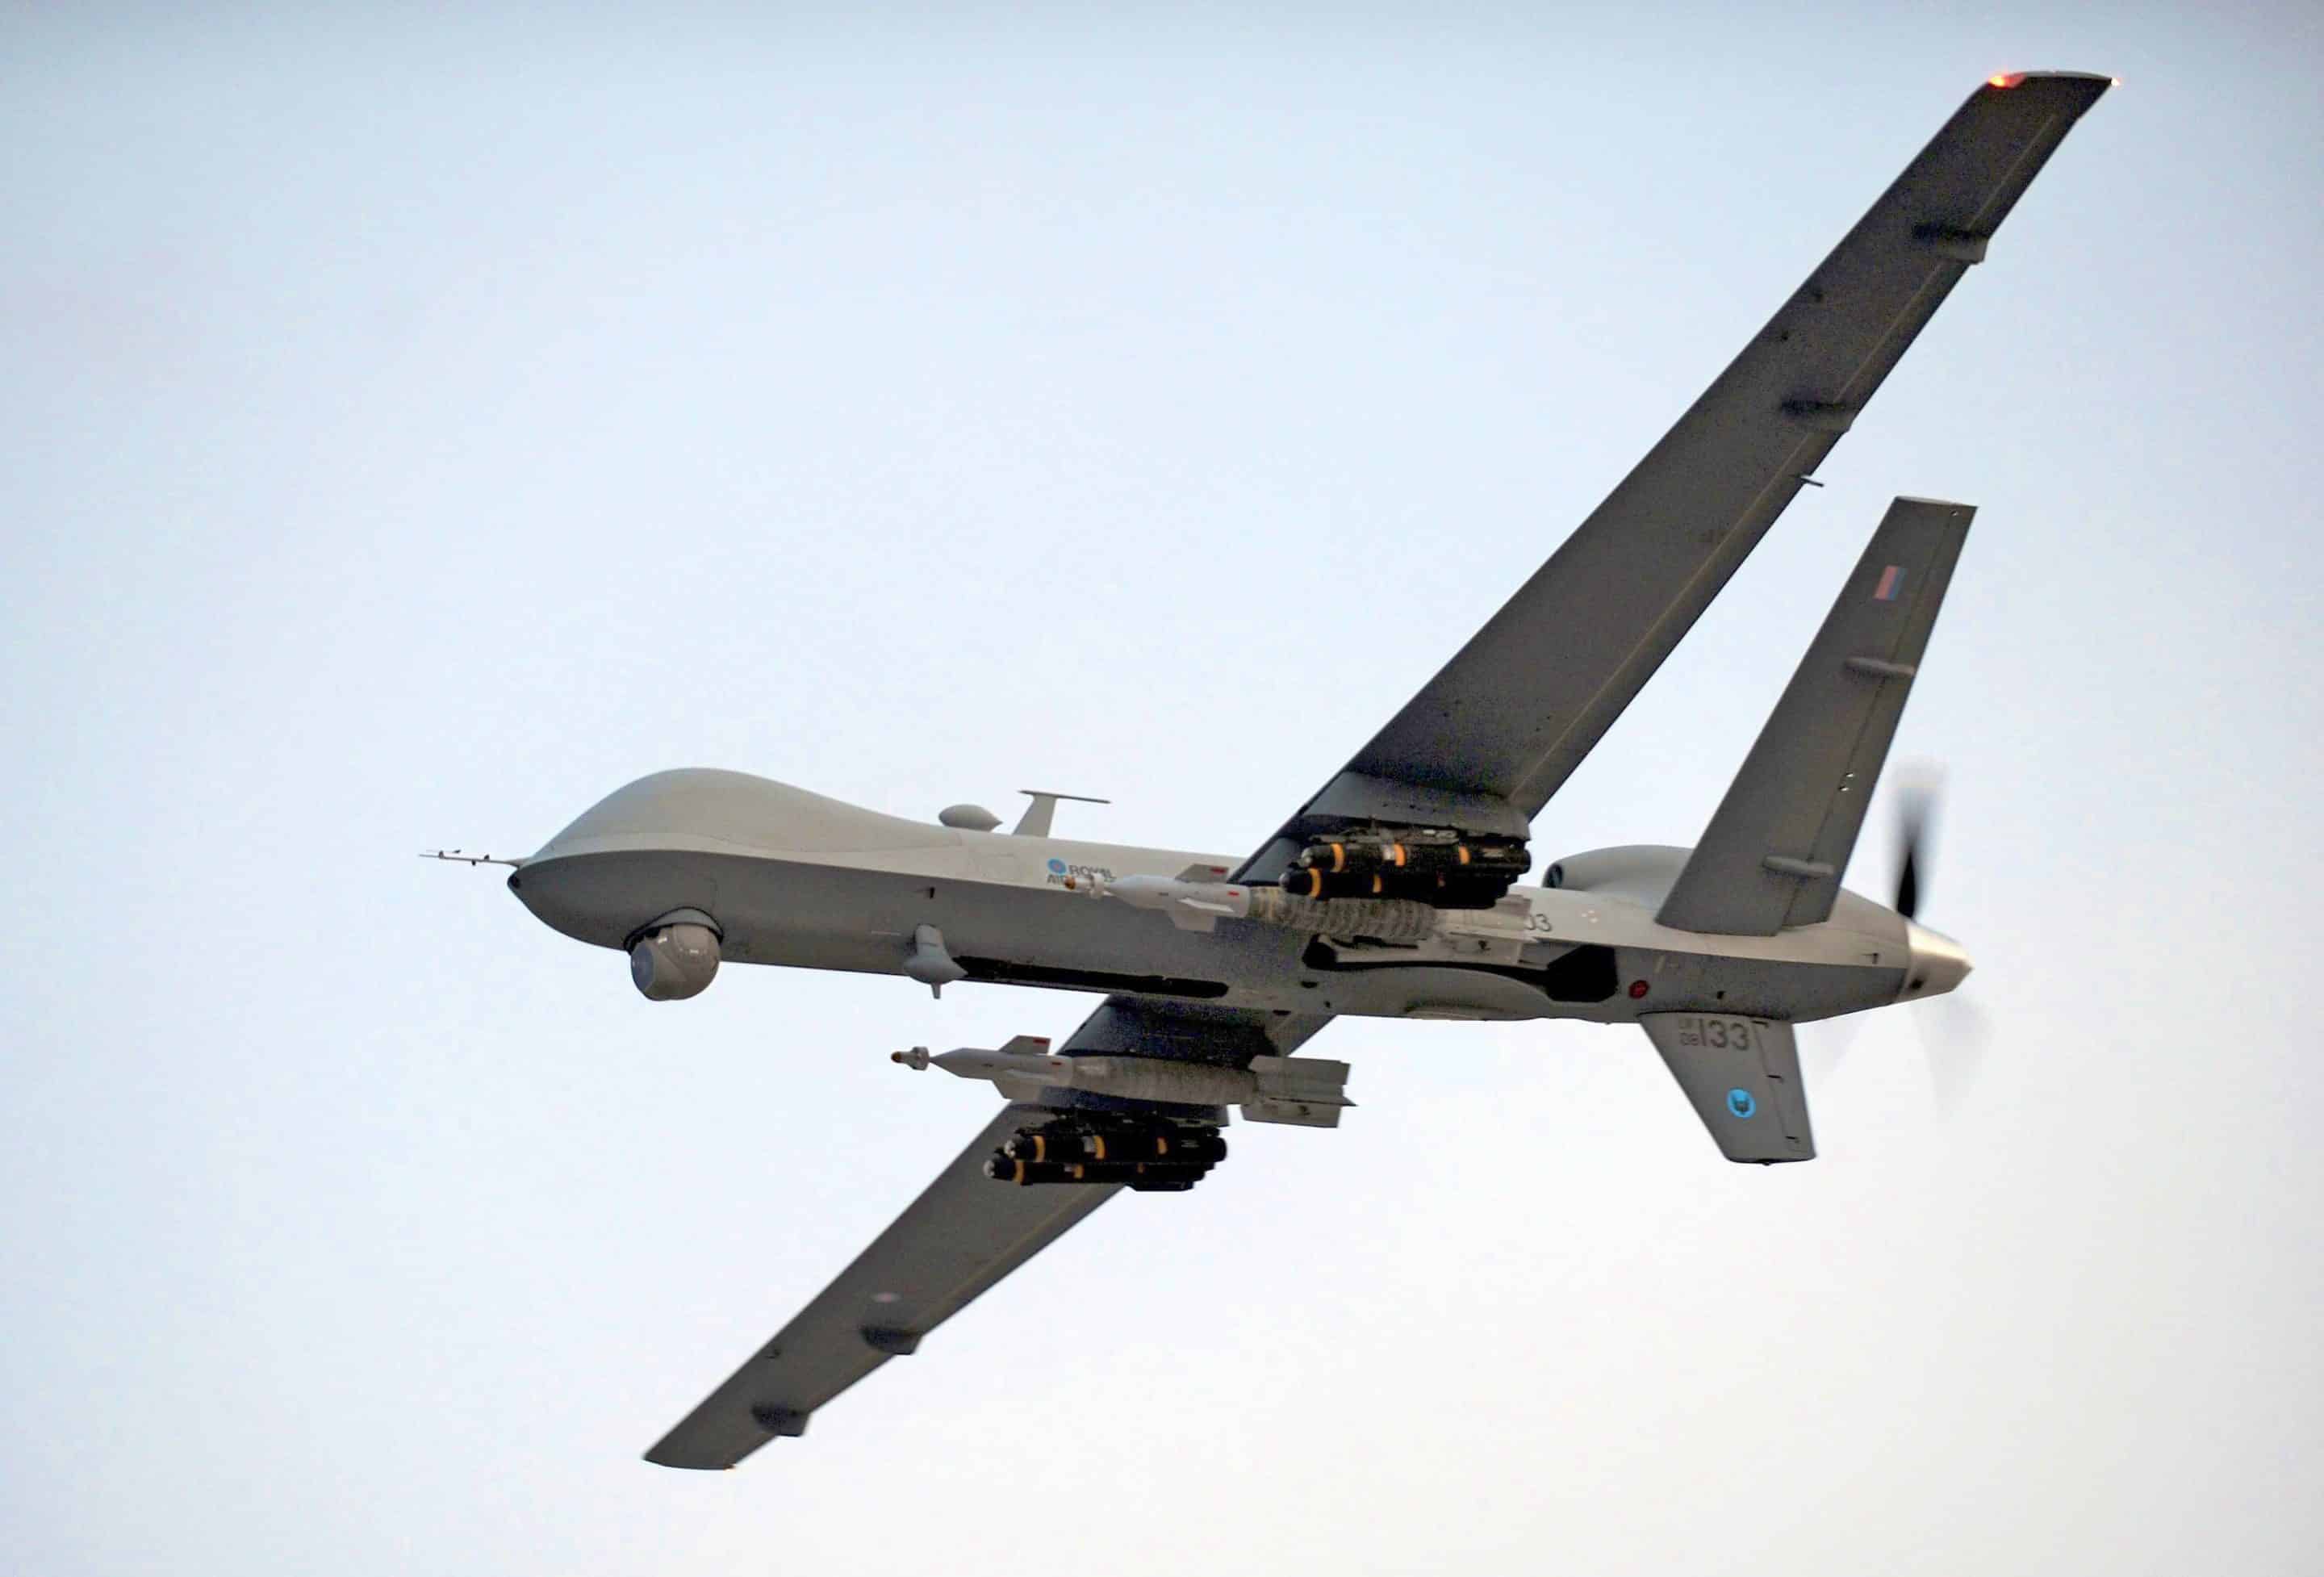 UK Joins US Conducting Drone Flights Over Gaza